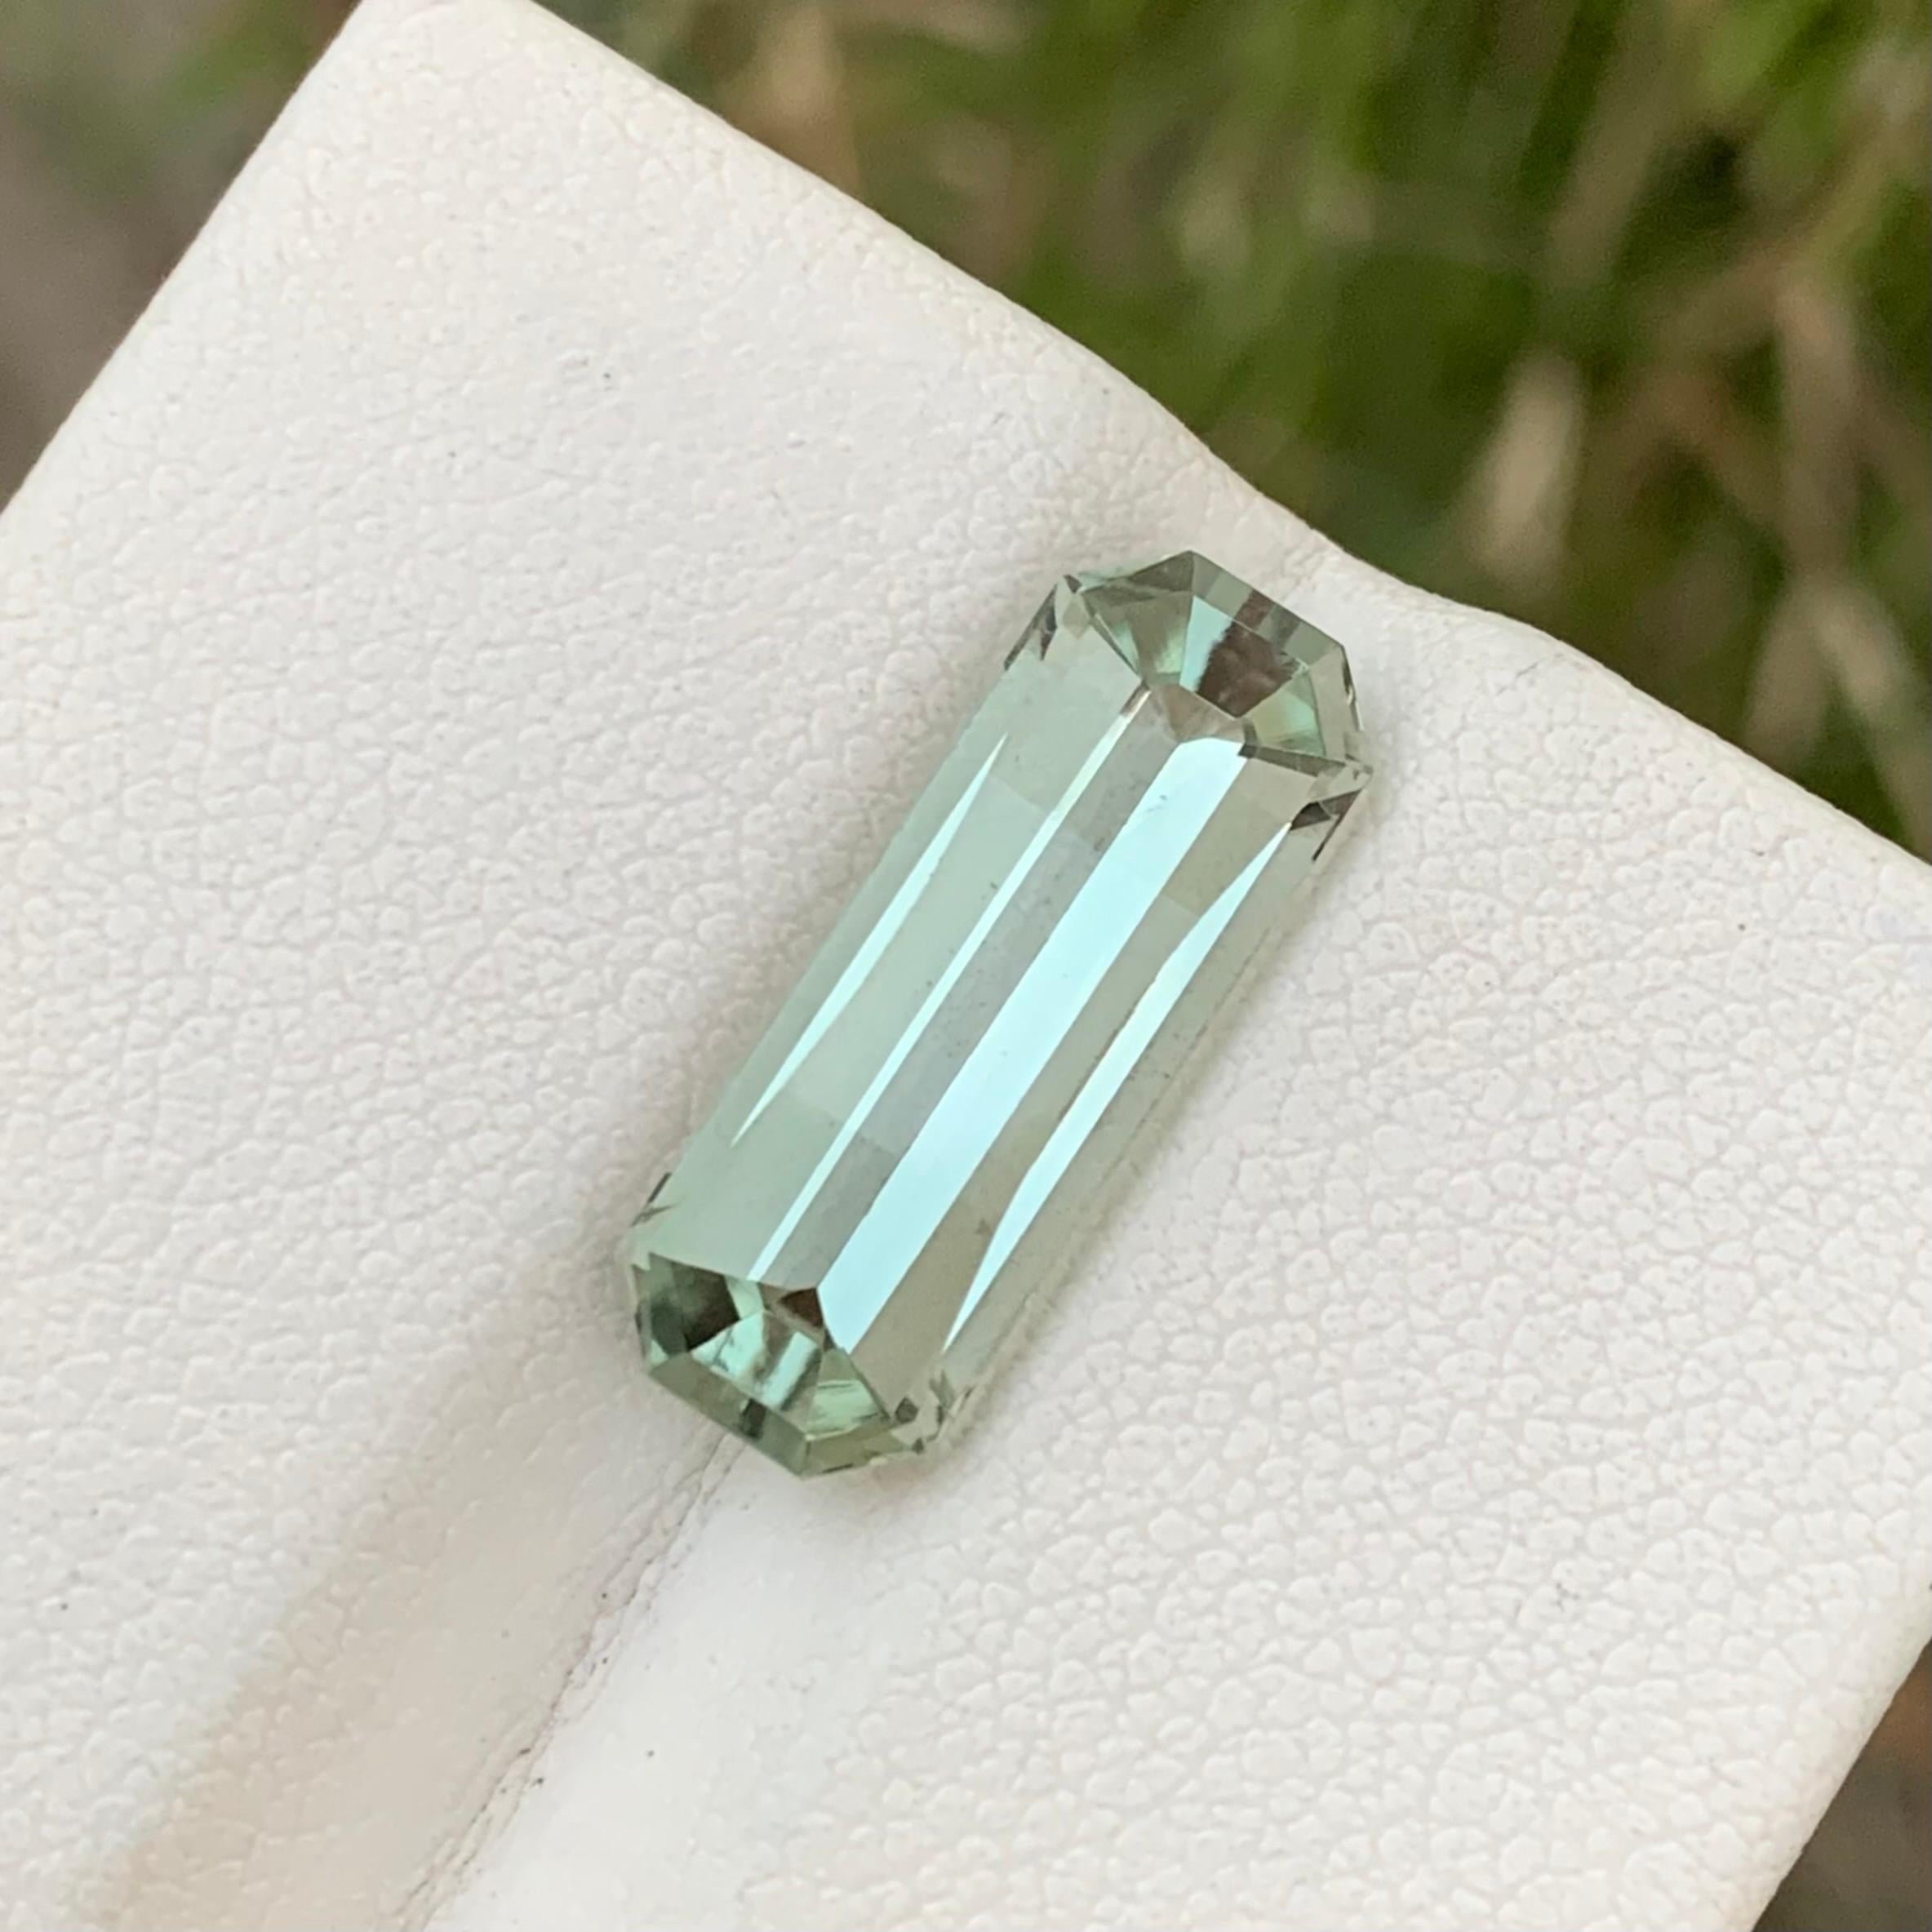 Loose Amethyst 
Weight: 5.70 Carats 
Dimension: 18.5x7x6.1 Mm
Origin: Brazil
Shape: Emerald
Cut: Pixel Cut / Pixelated Cut / Smith Bar Cut
Treatment: None
Certificate: On Demand
Prasiolite, commonly known as green amethyst, is a captivating gemstone